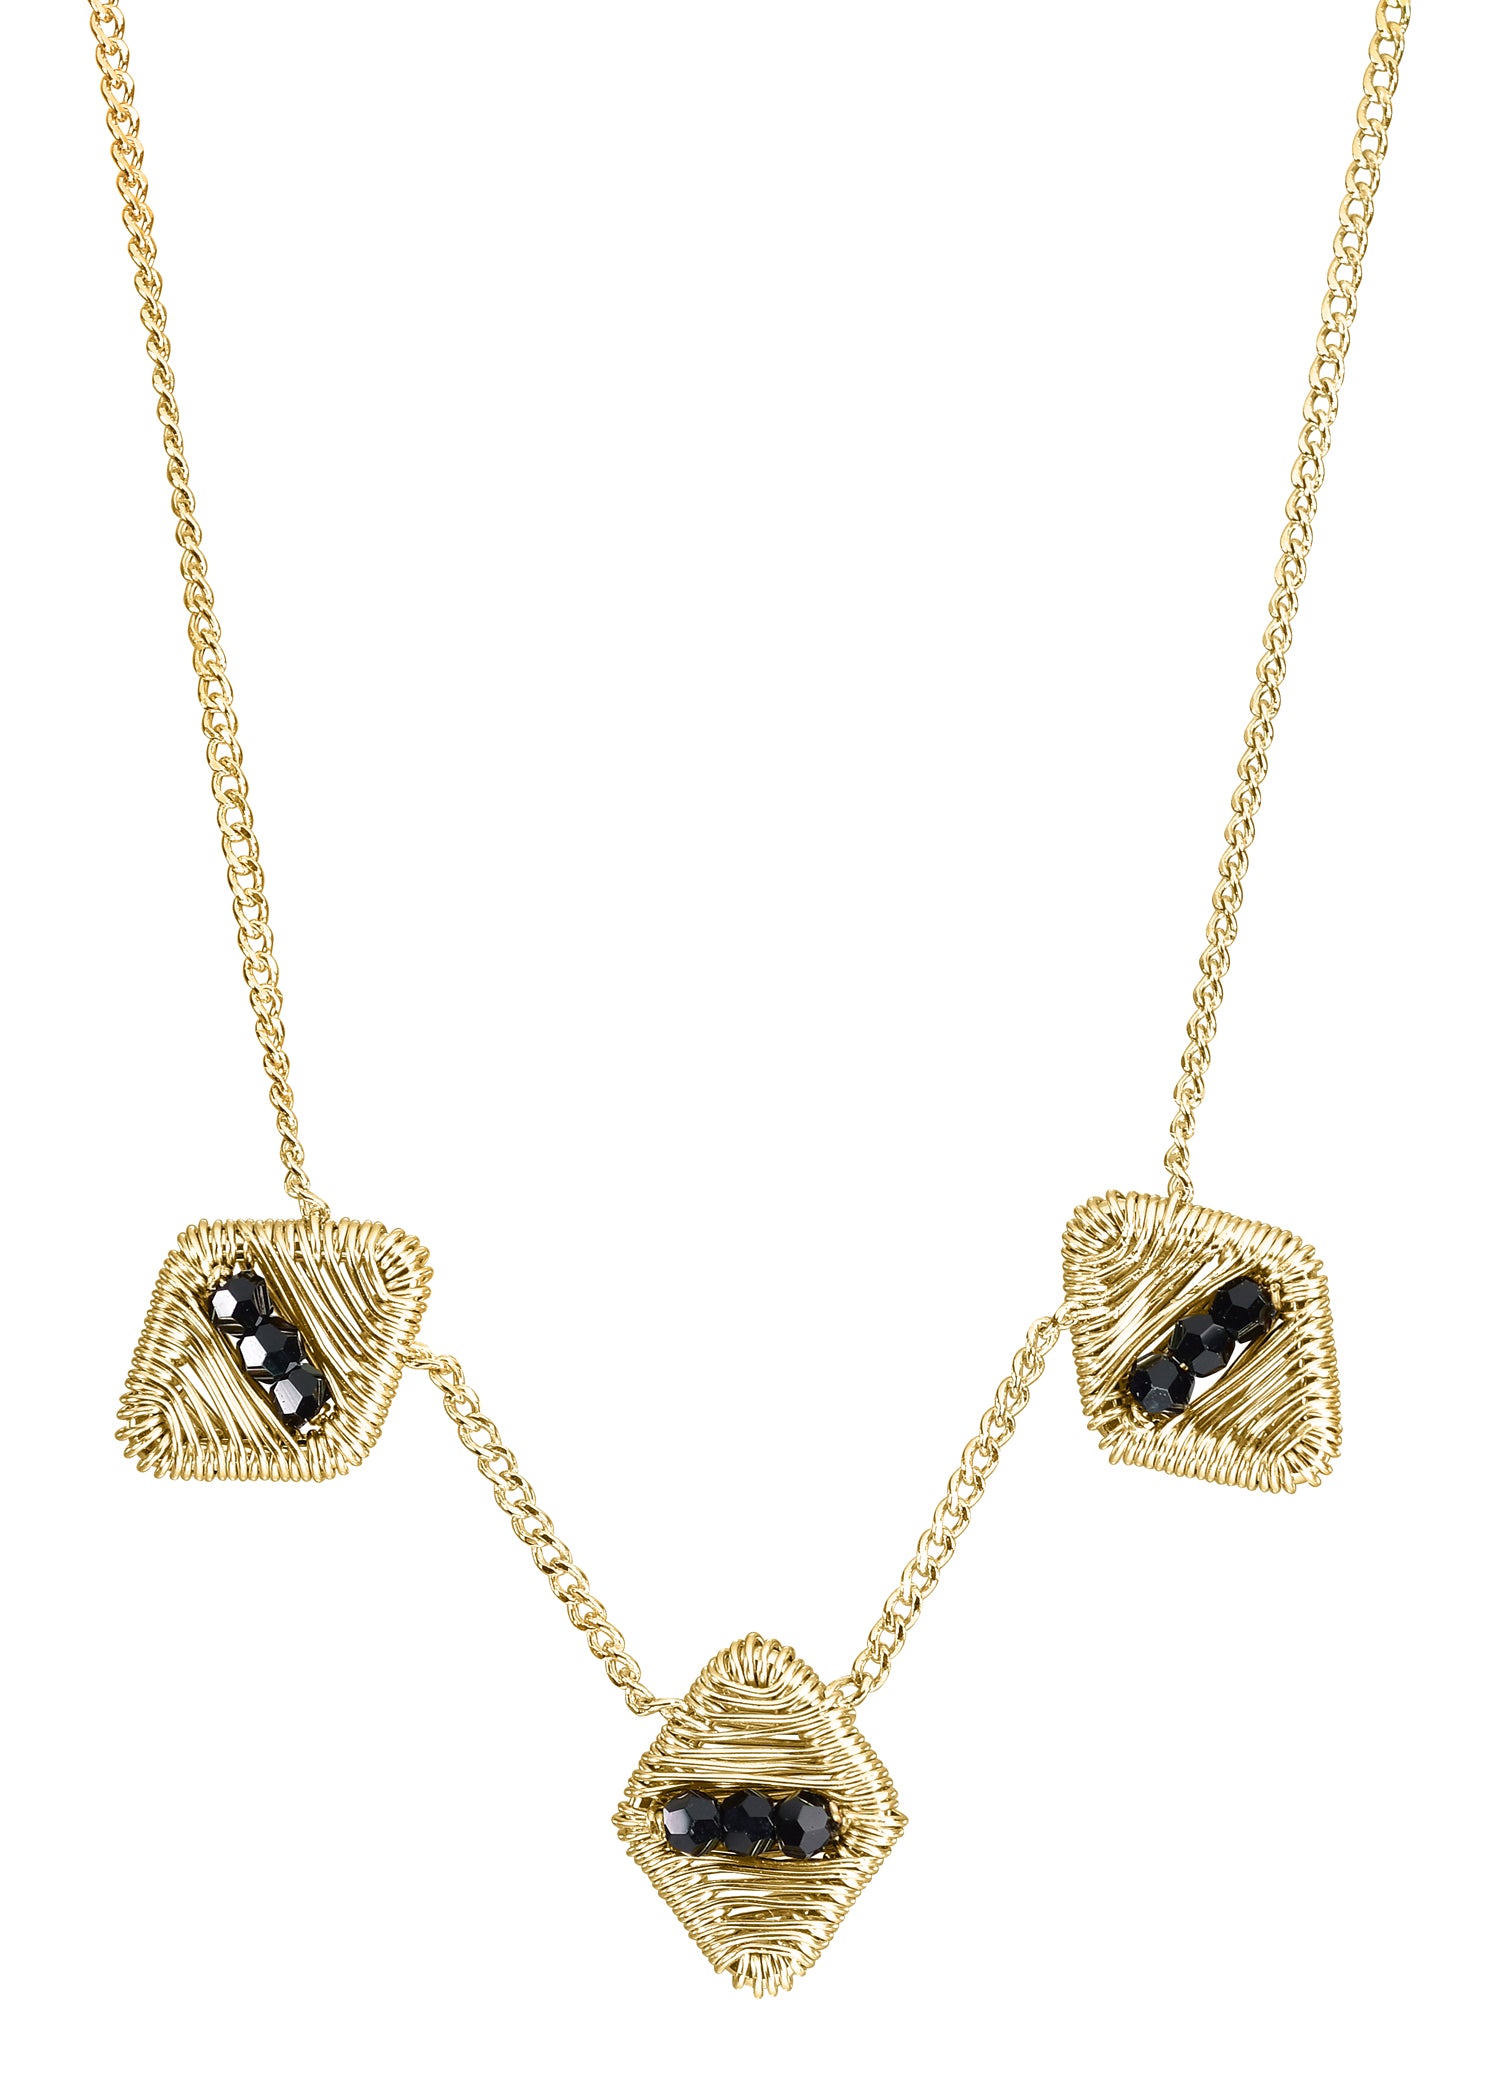 Crystal 14k gold fill Necklace measures 16-1/4" in length Pendants measure 3/8" in length and 5/16" in width (x3) Handmade in our Los Angeles studio